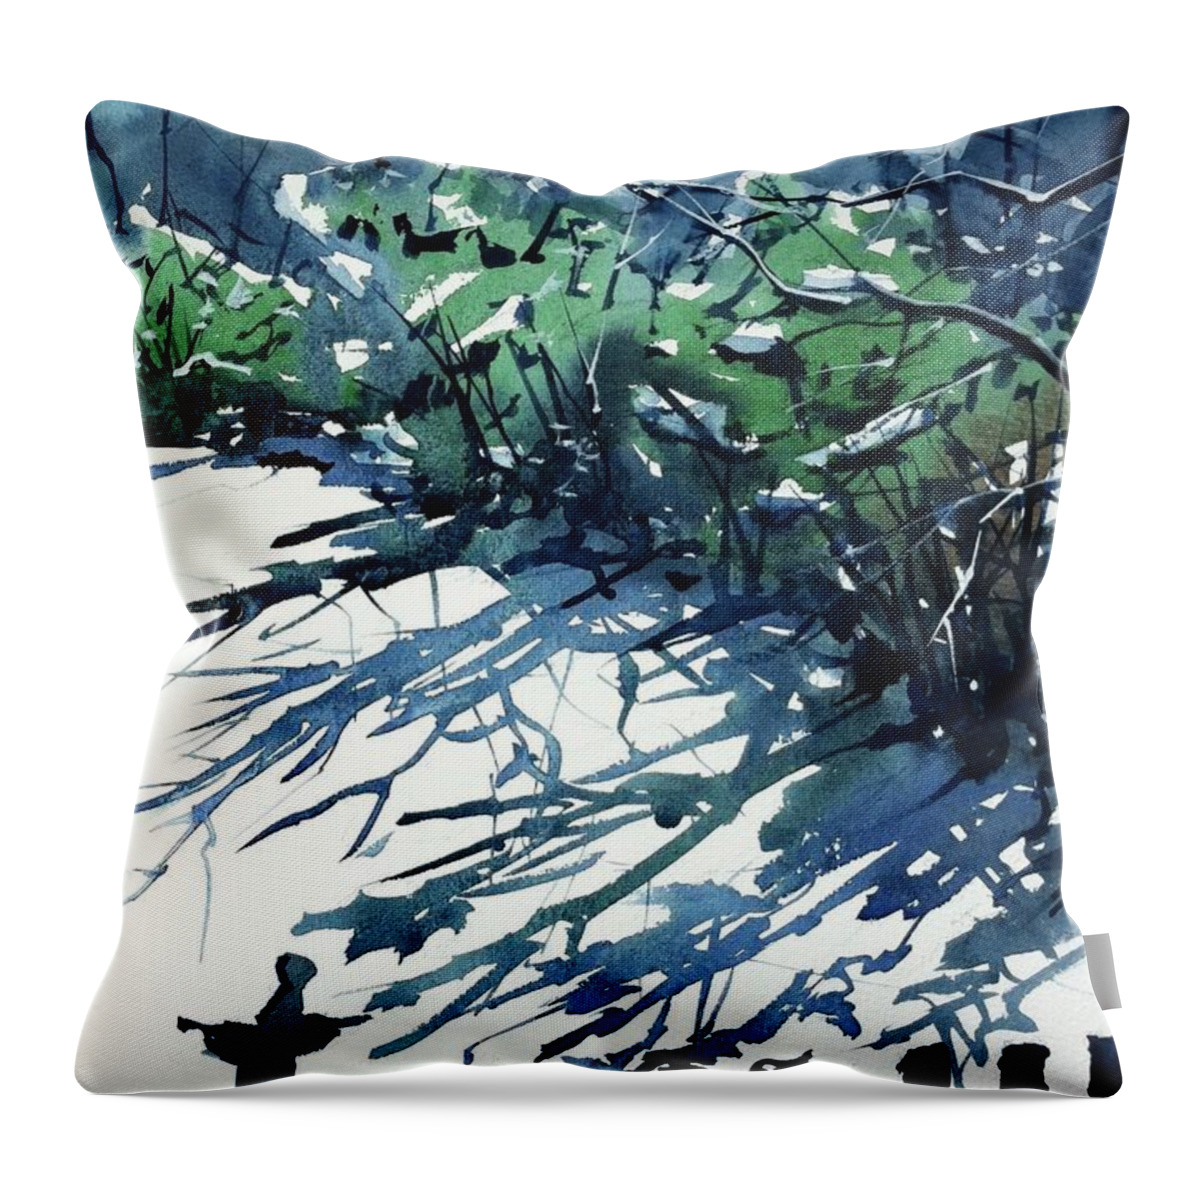  Throw Pillow featuring the painting Watercolor4597 by Ugljesa Janjic